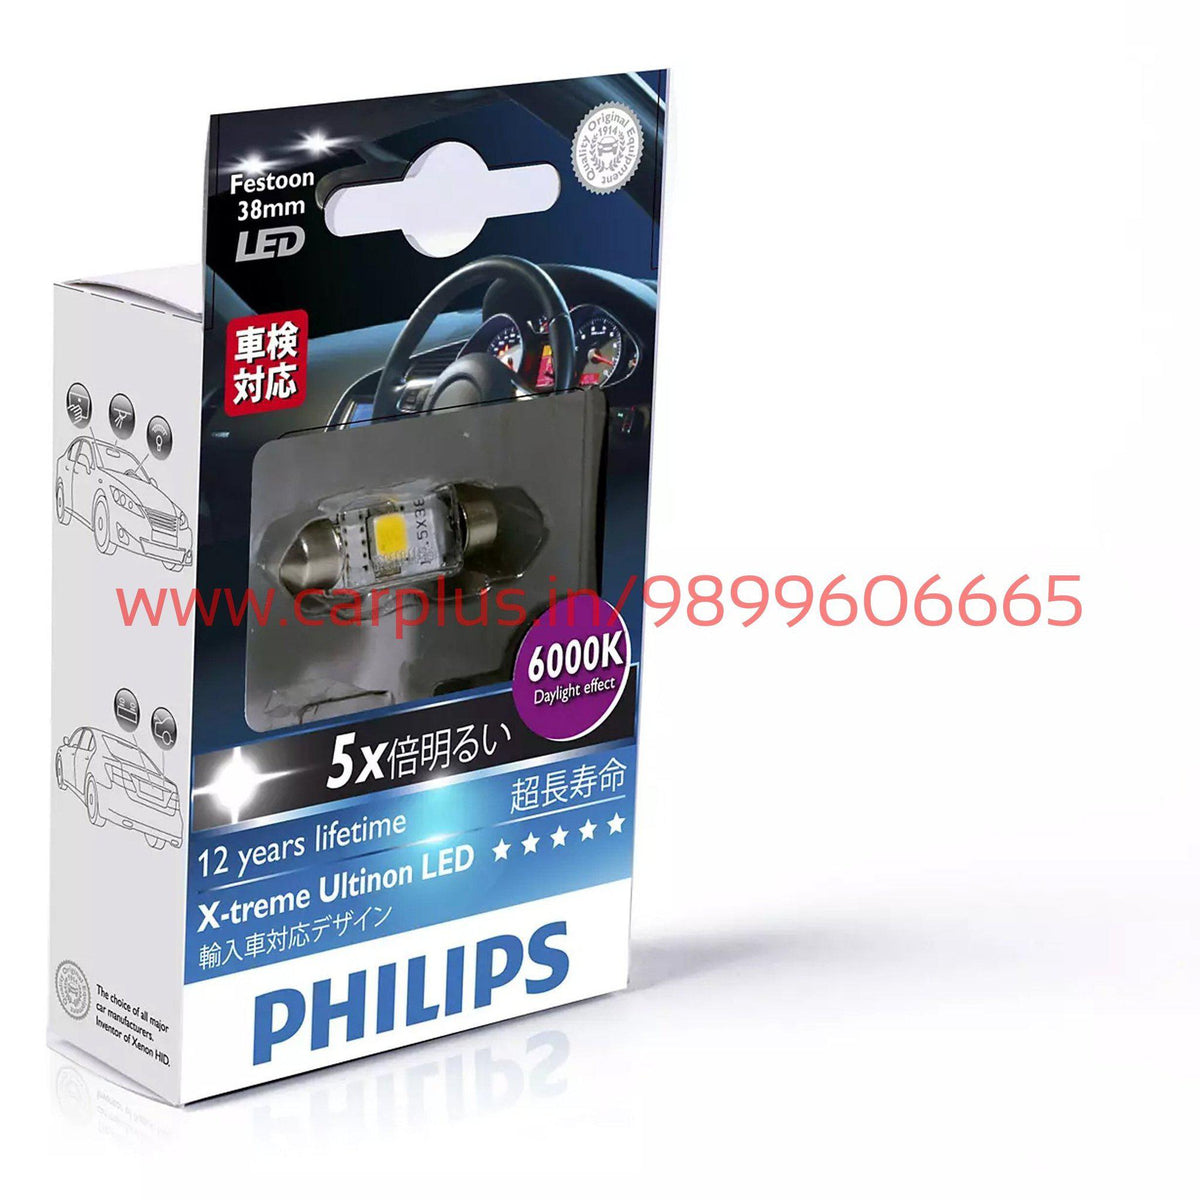 http://www.carplus.in/cdn/shop/products/Philips-X-Treme-Ultinon-LED-INTERIOR-LED-LAMPS-PHILIPS_2972d766-340f-46d9-8df2-515035cb5165_1200x1200.jpg?v=1631747985